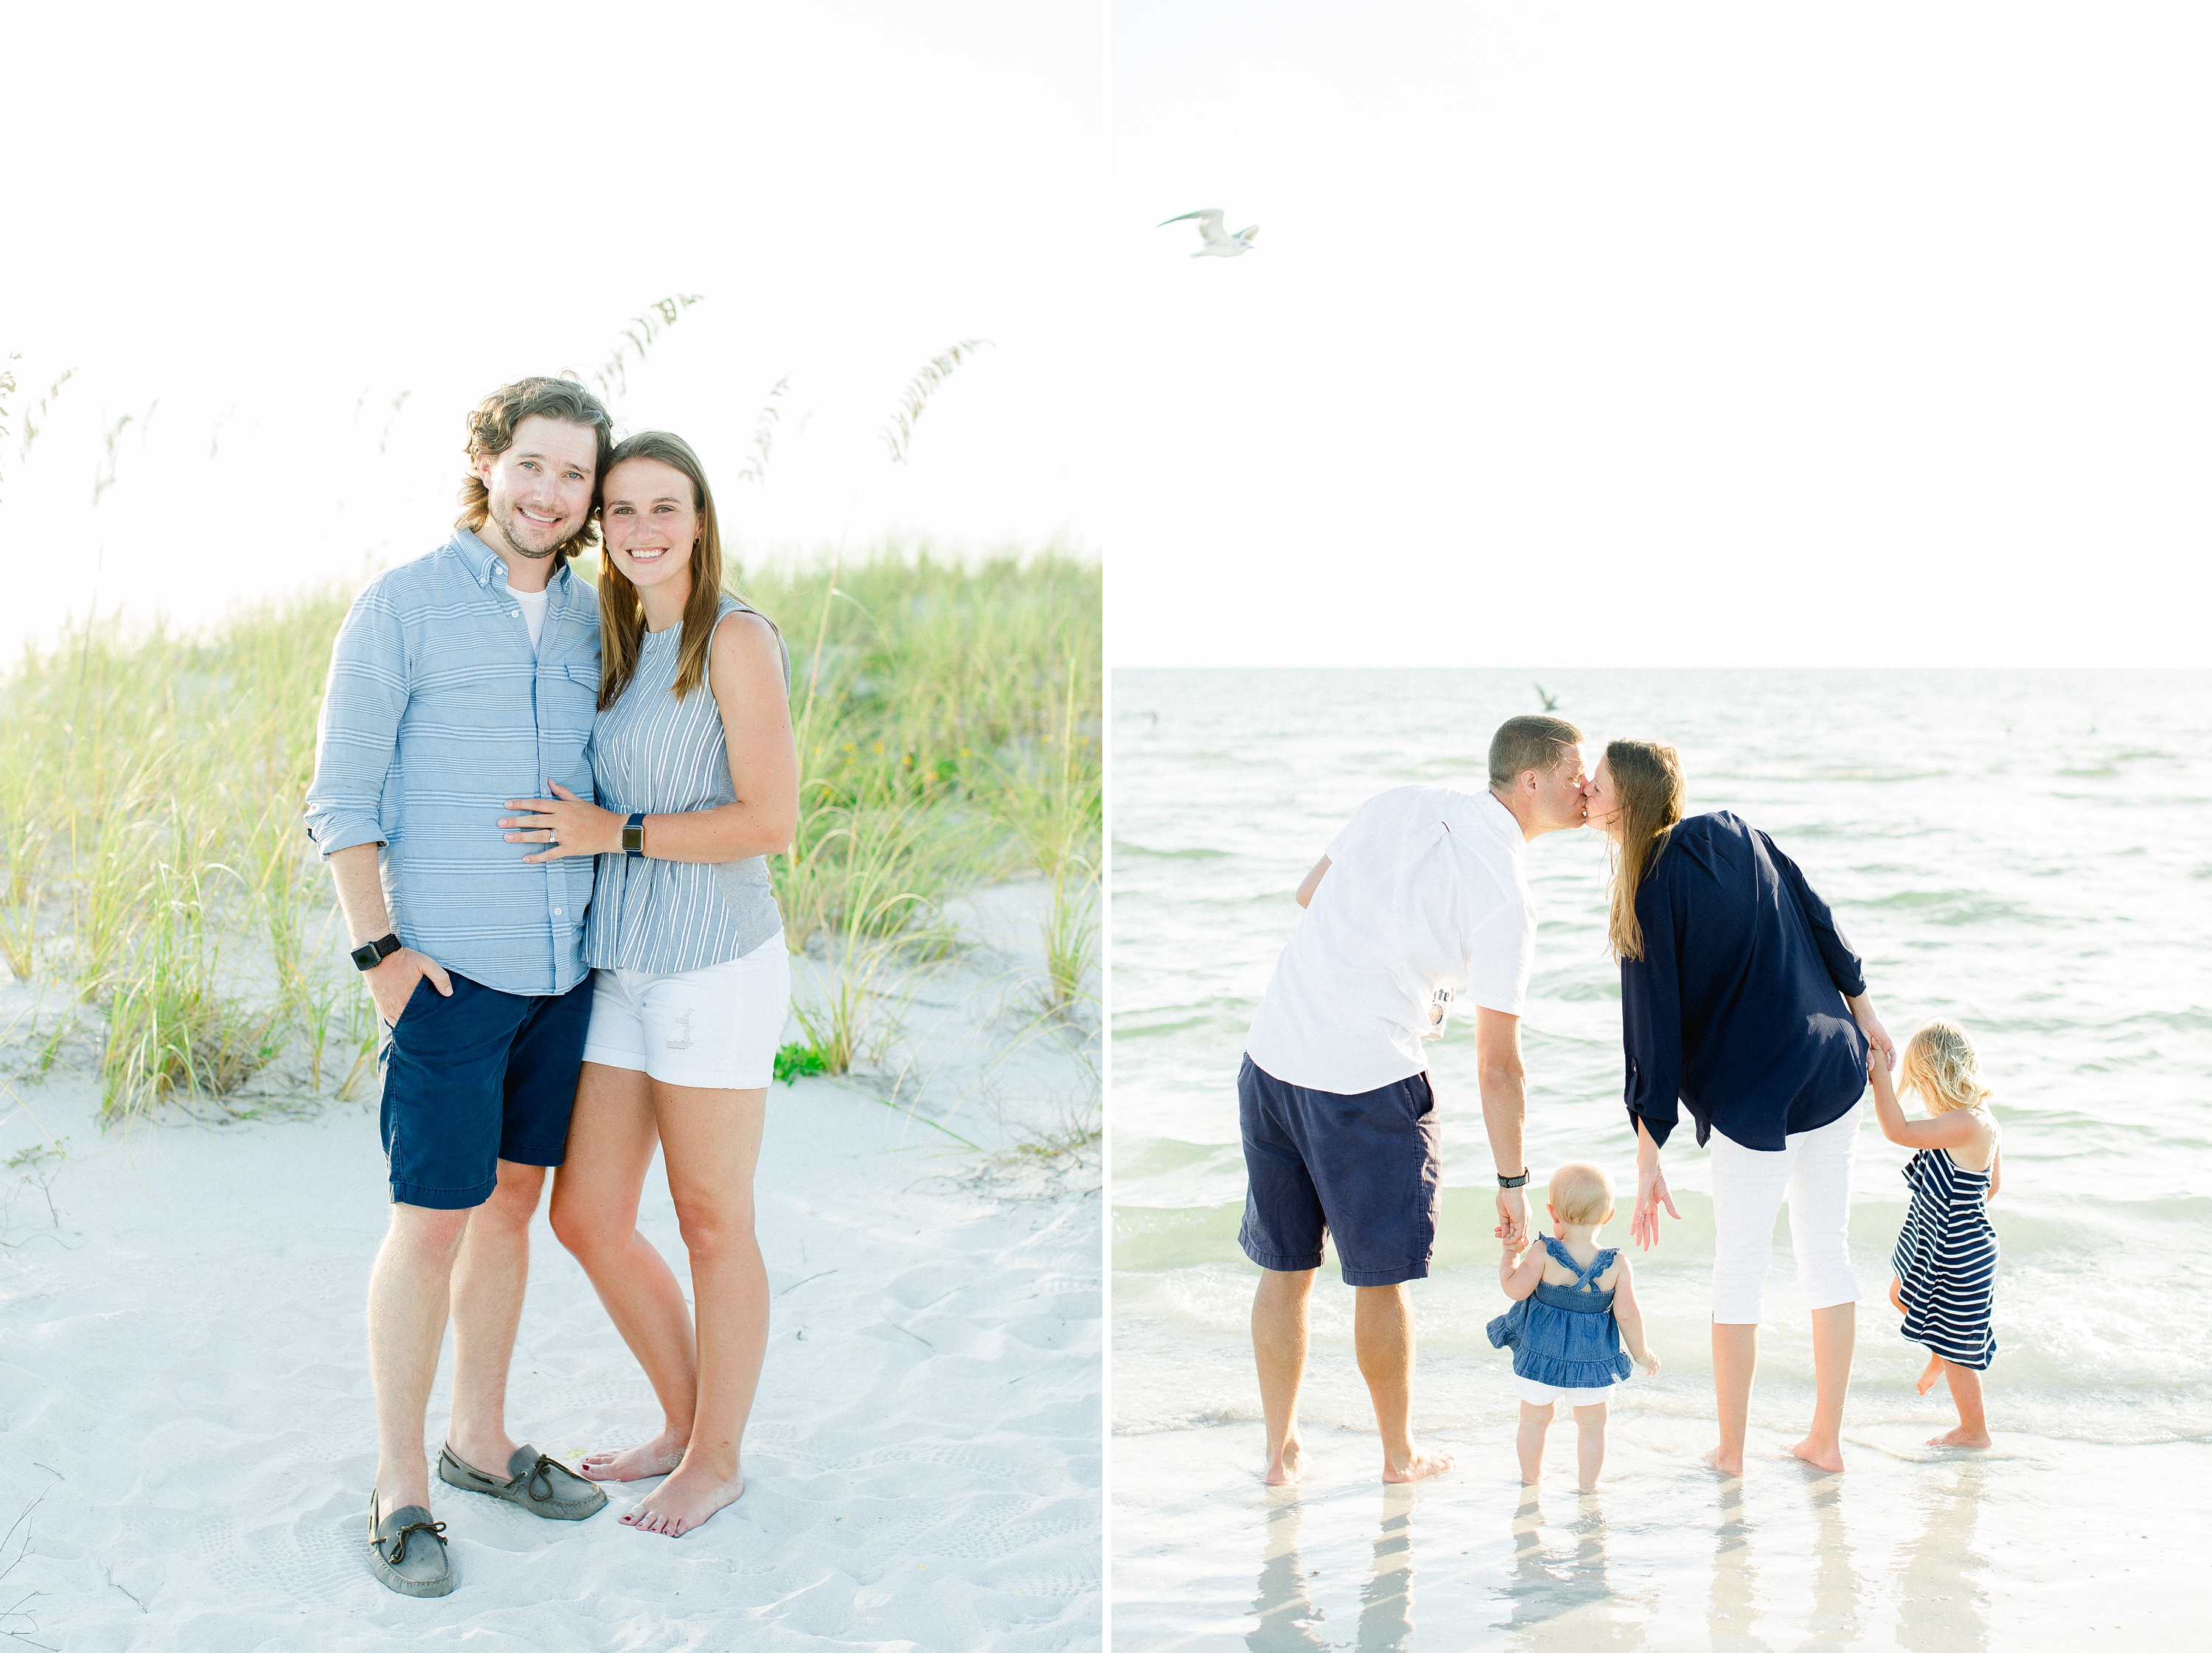 Tampa Family Photographer | © Ailyn LaTorre Photography 2019